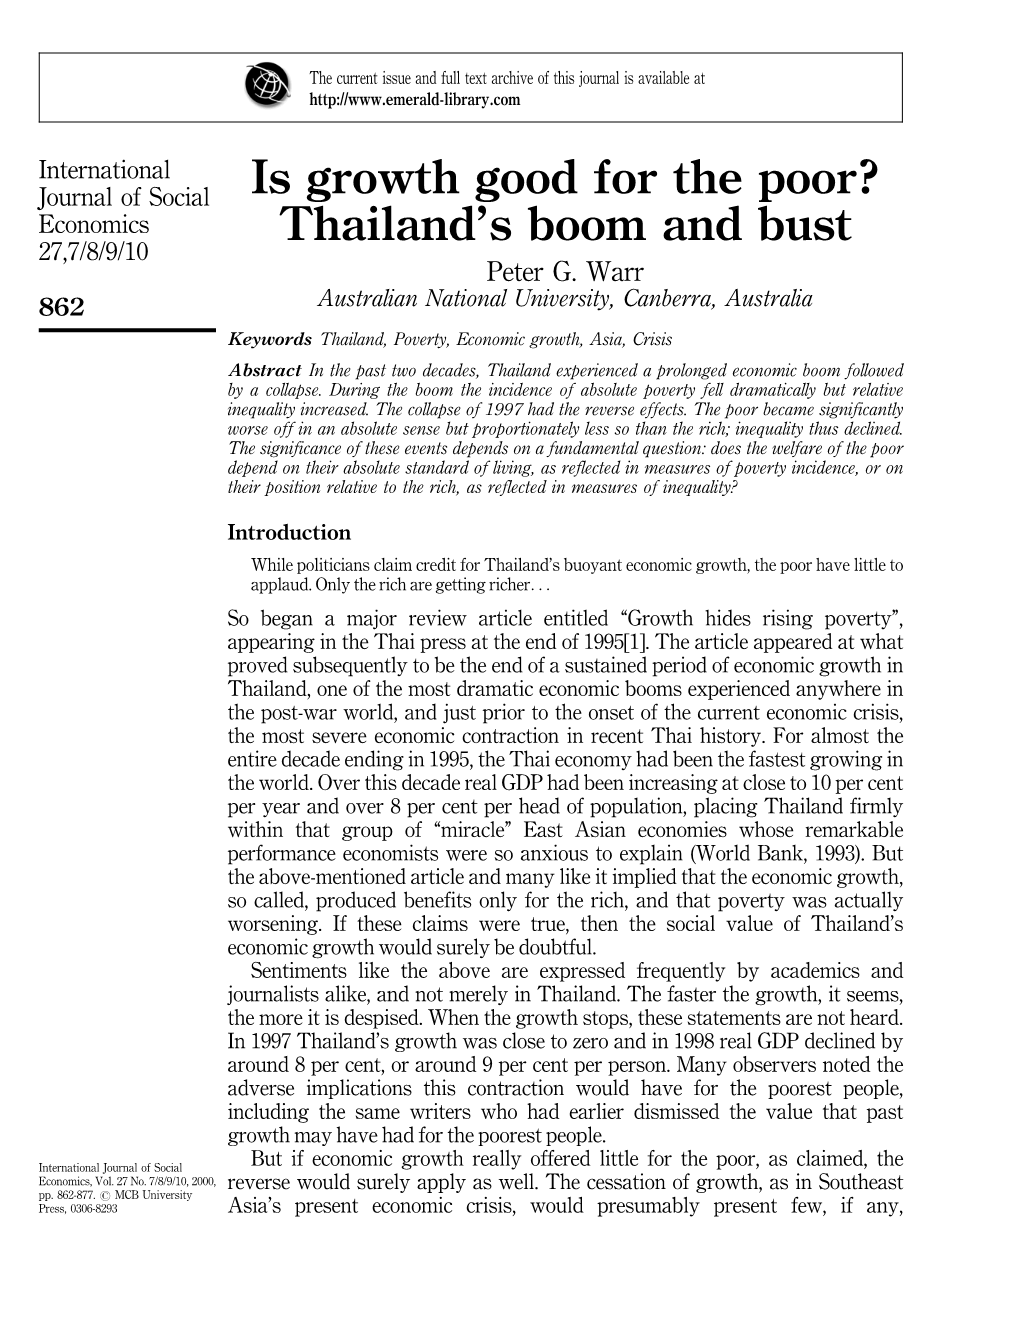 Is Growth Good for the Poor? Thailand's Boom and Bust